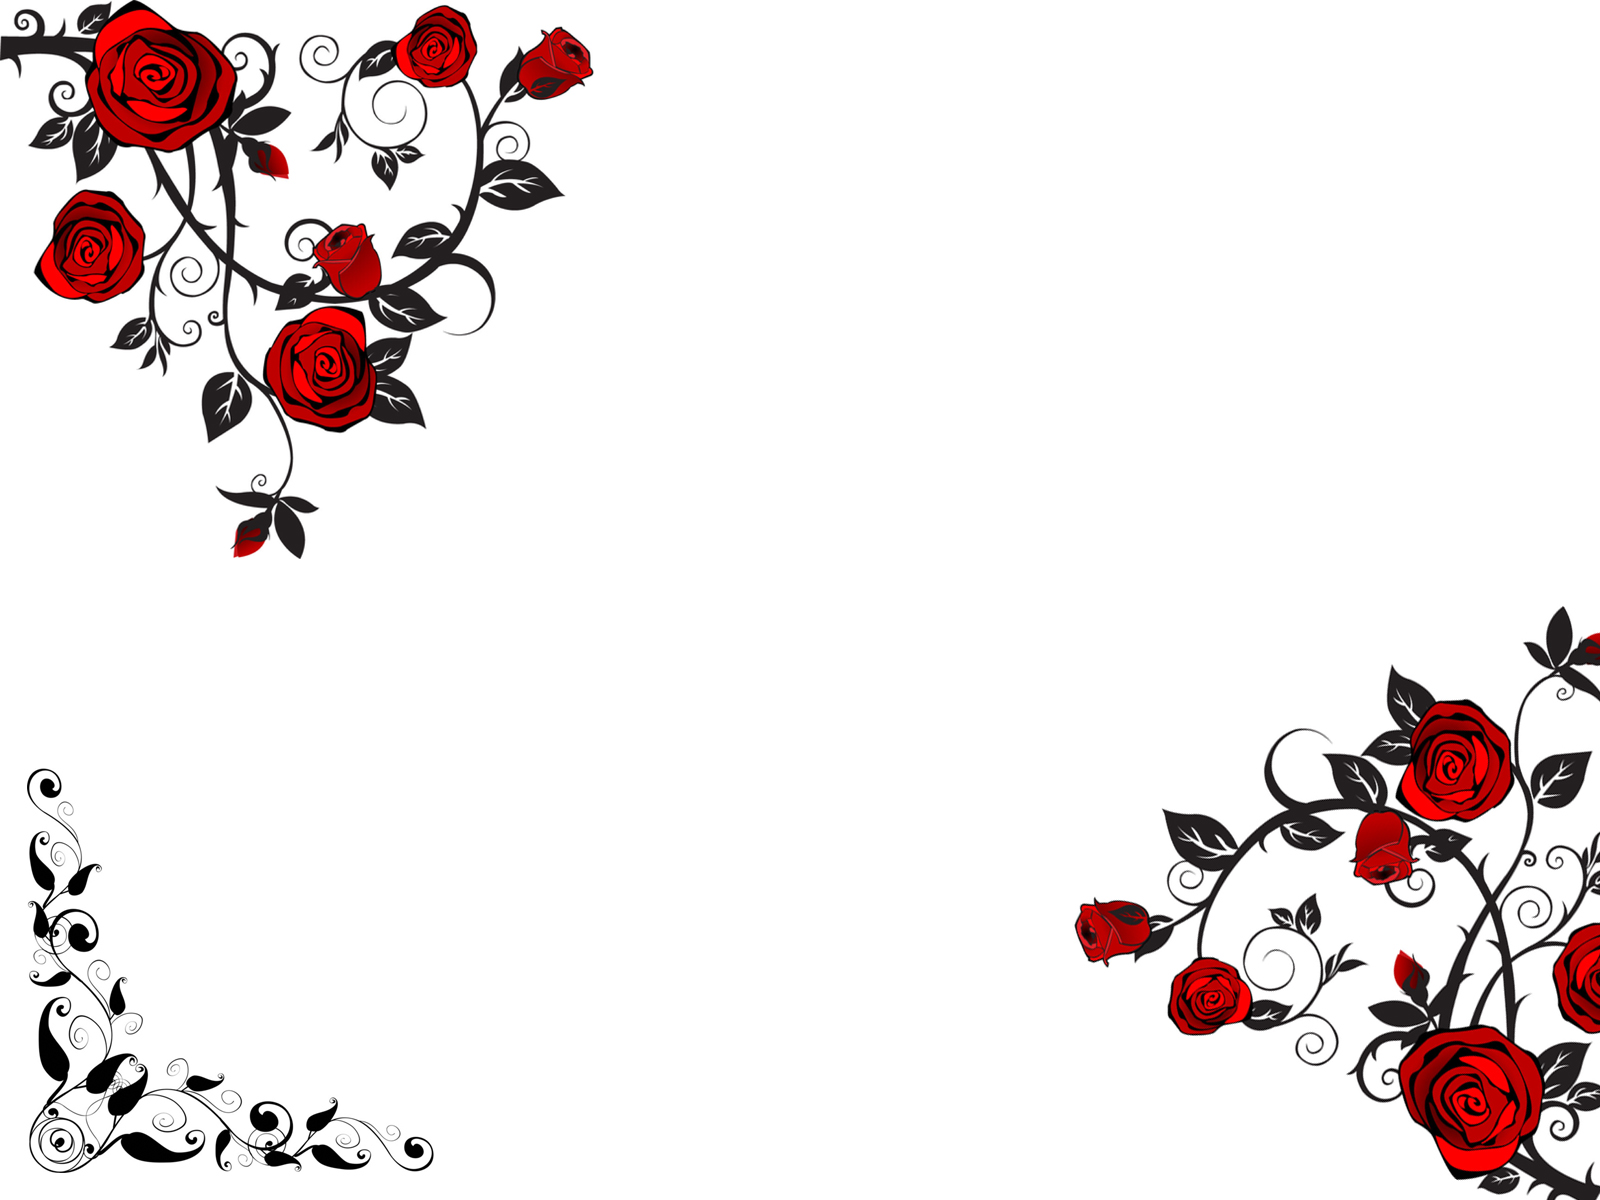 Red Rose Flower Backgrounds Black Flowers Red Templates Free PPT Grounds And PowerPoint